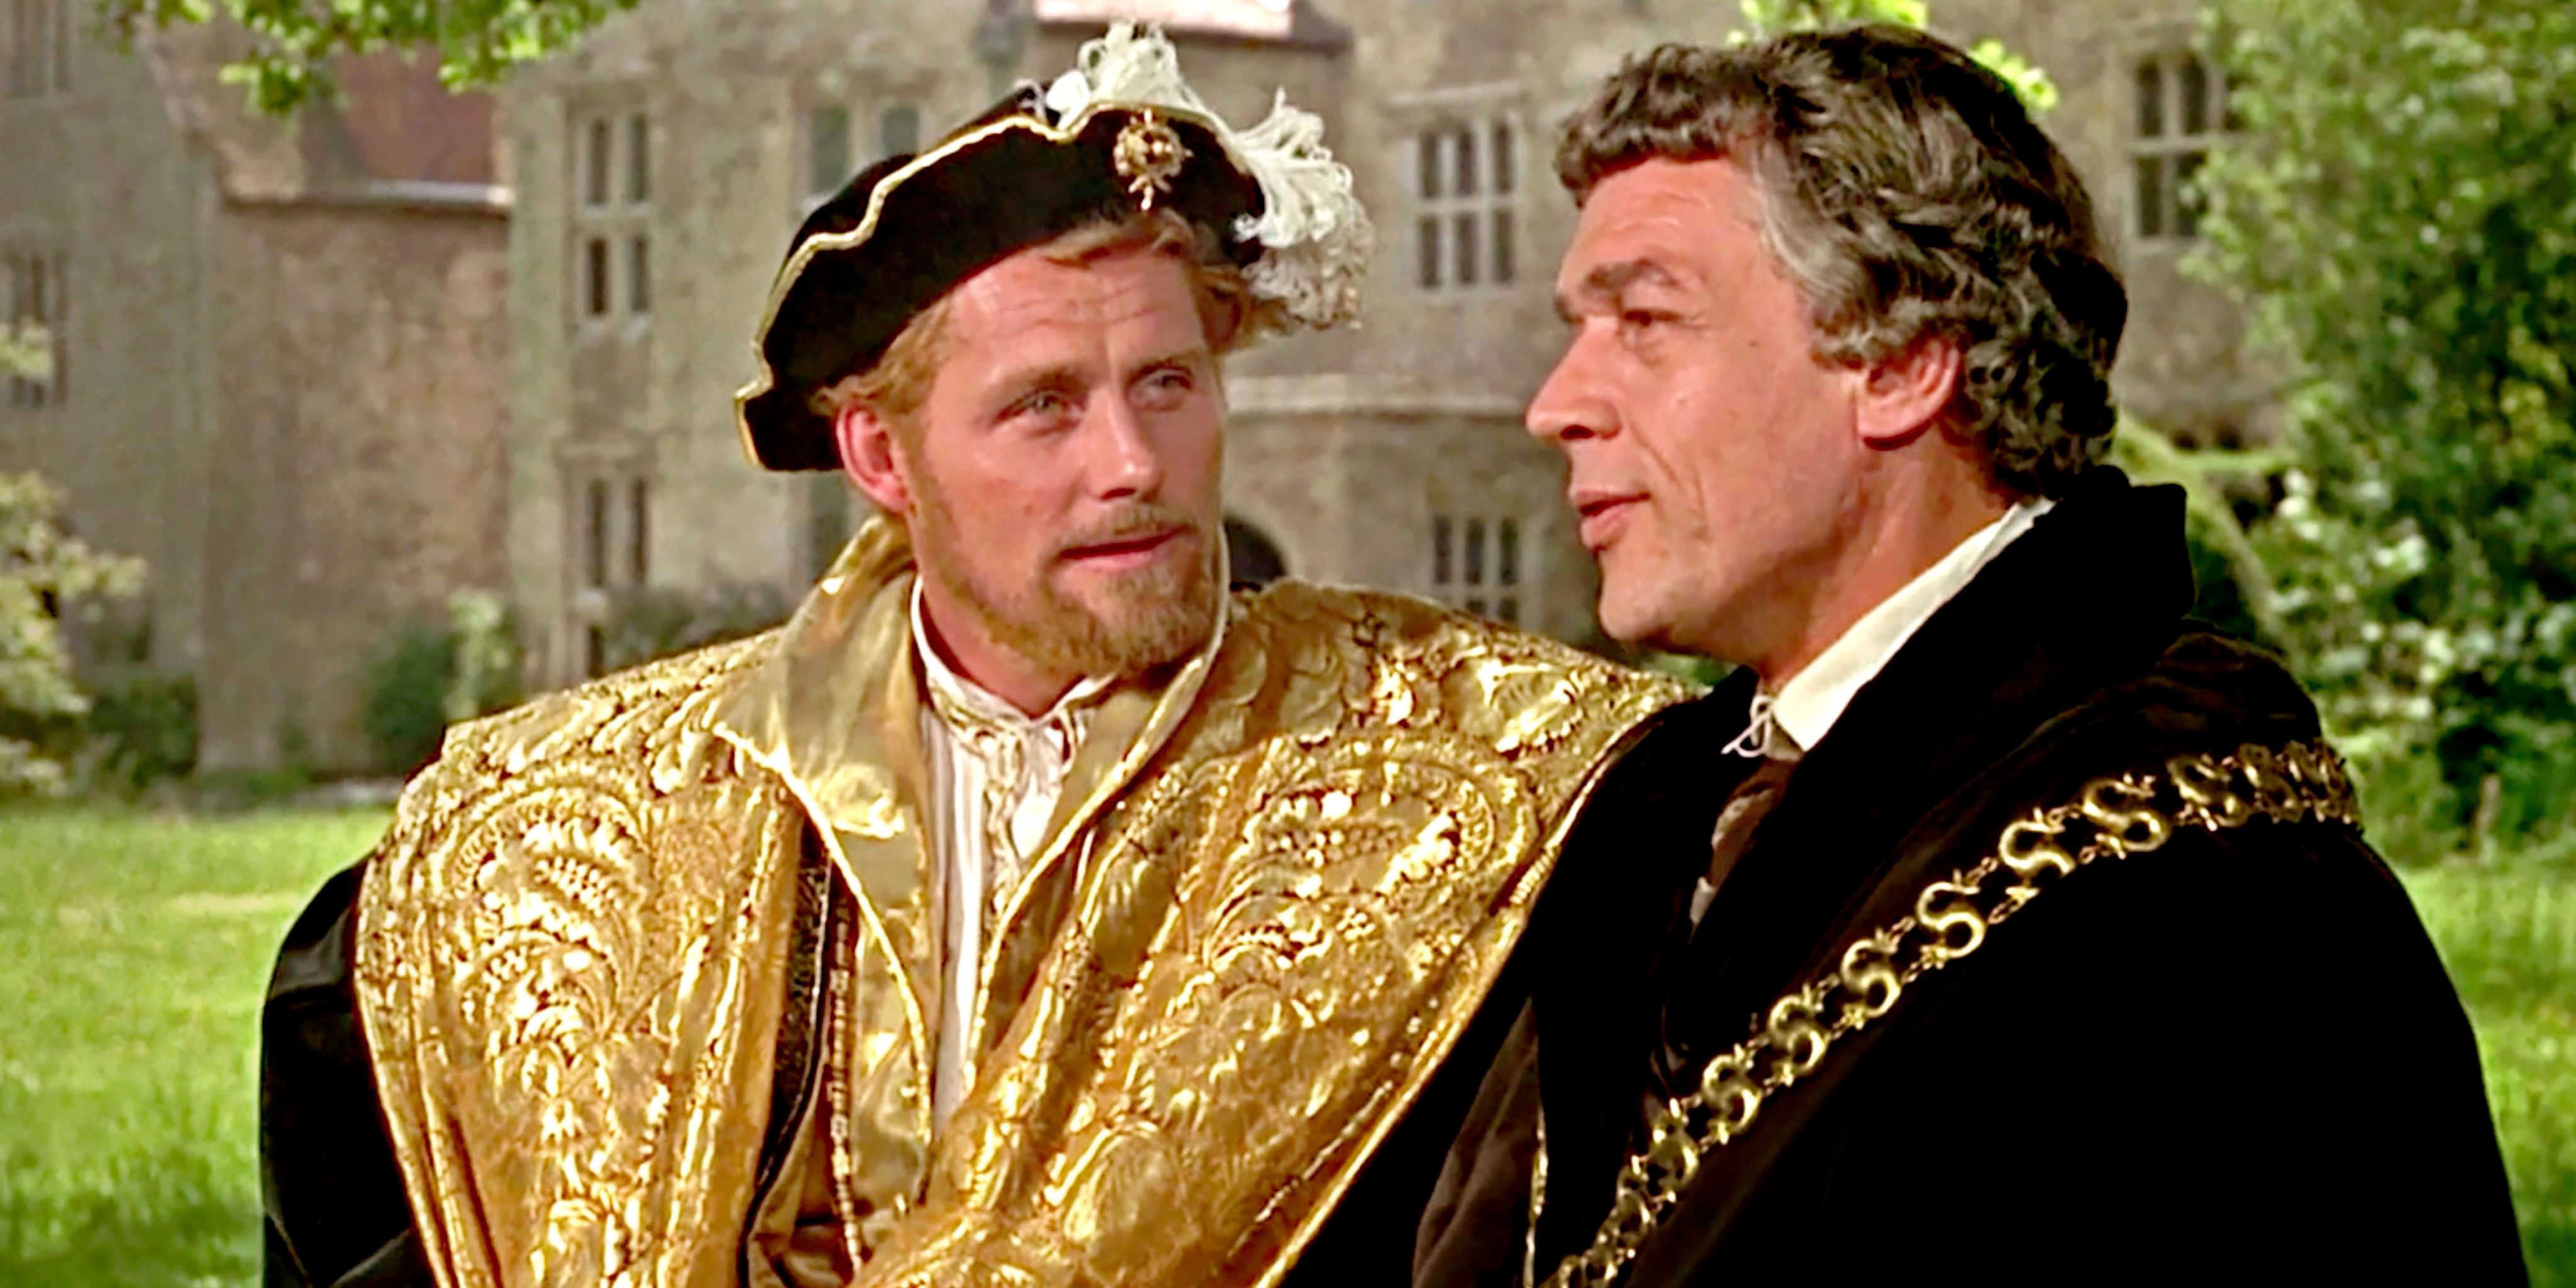 Robert Shaw as Henry VIII and Paul Scofield as Thomas More in ‘A Man-for-All-Seasons’ (1966)